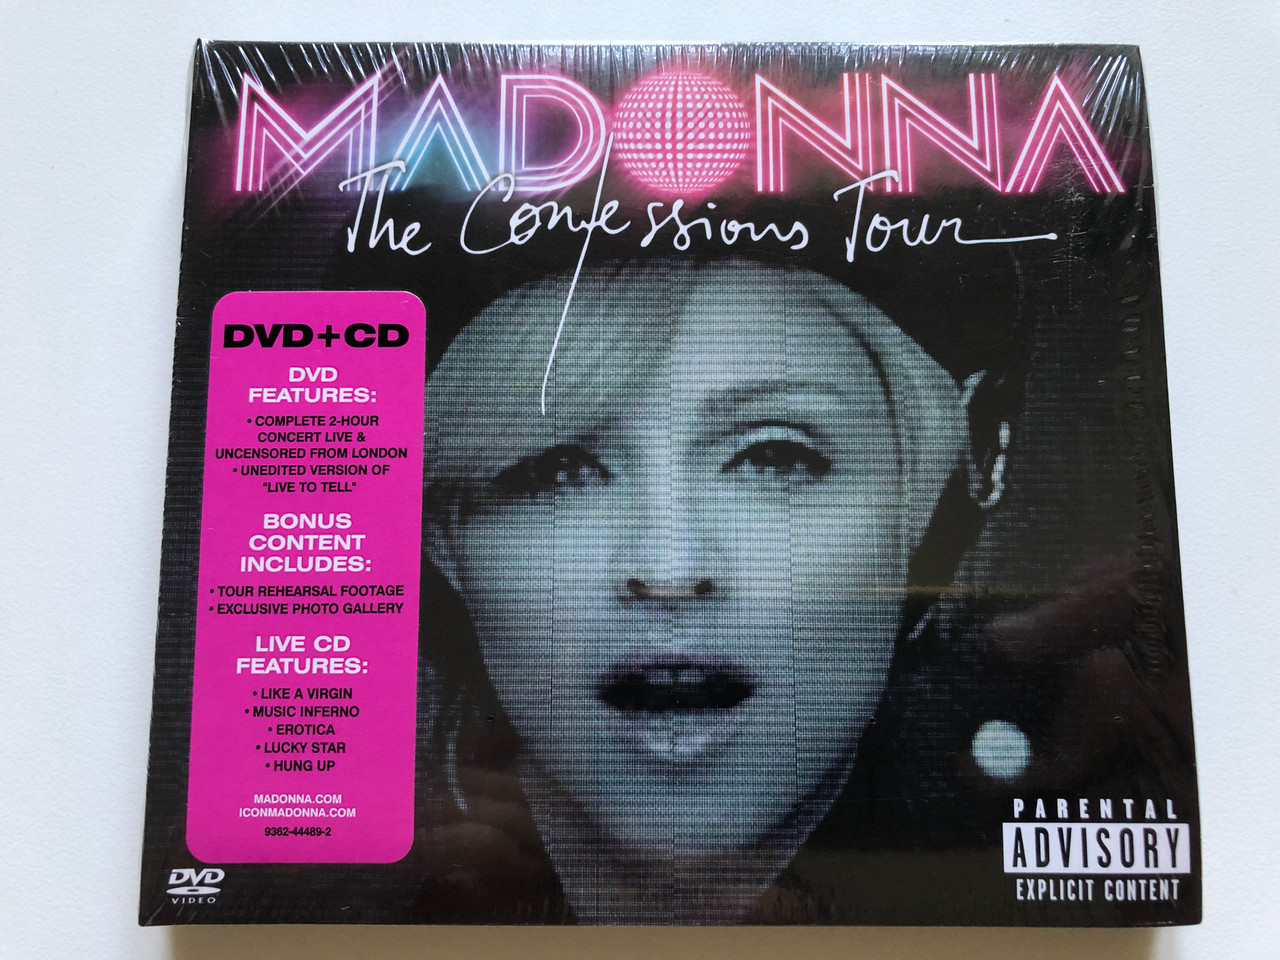 Madonna - The Confessions Tour / DVD + CD / DVD Features: Complete 2-Hour  Concert Live & Uncensored From London; Unedited Version Of ''Live To Tell''  / Warner Bros. Records DVD Video CD + Audio CD 2007 / 9362-44489-2 -  bibleinmylanguage